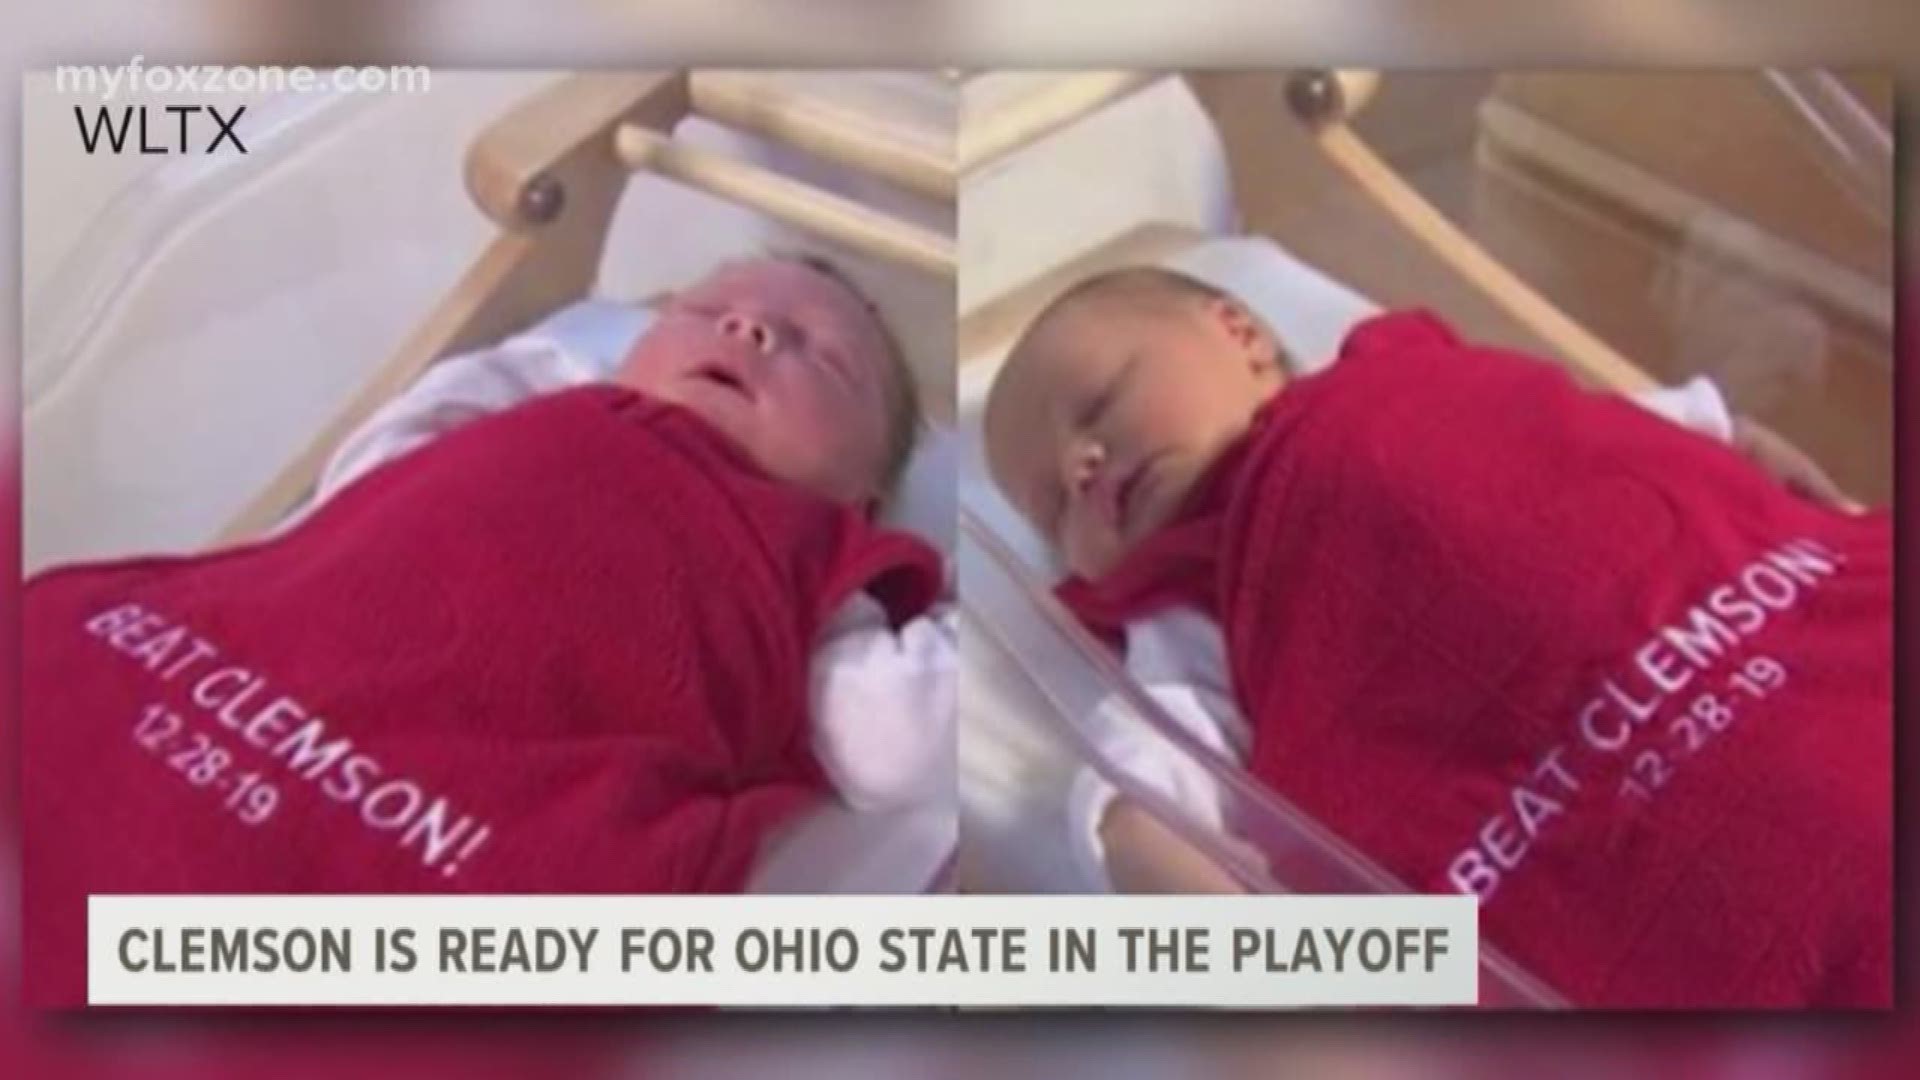 Ohio State Medical Center is wrapping newborns in "Beat Clemson" blankets